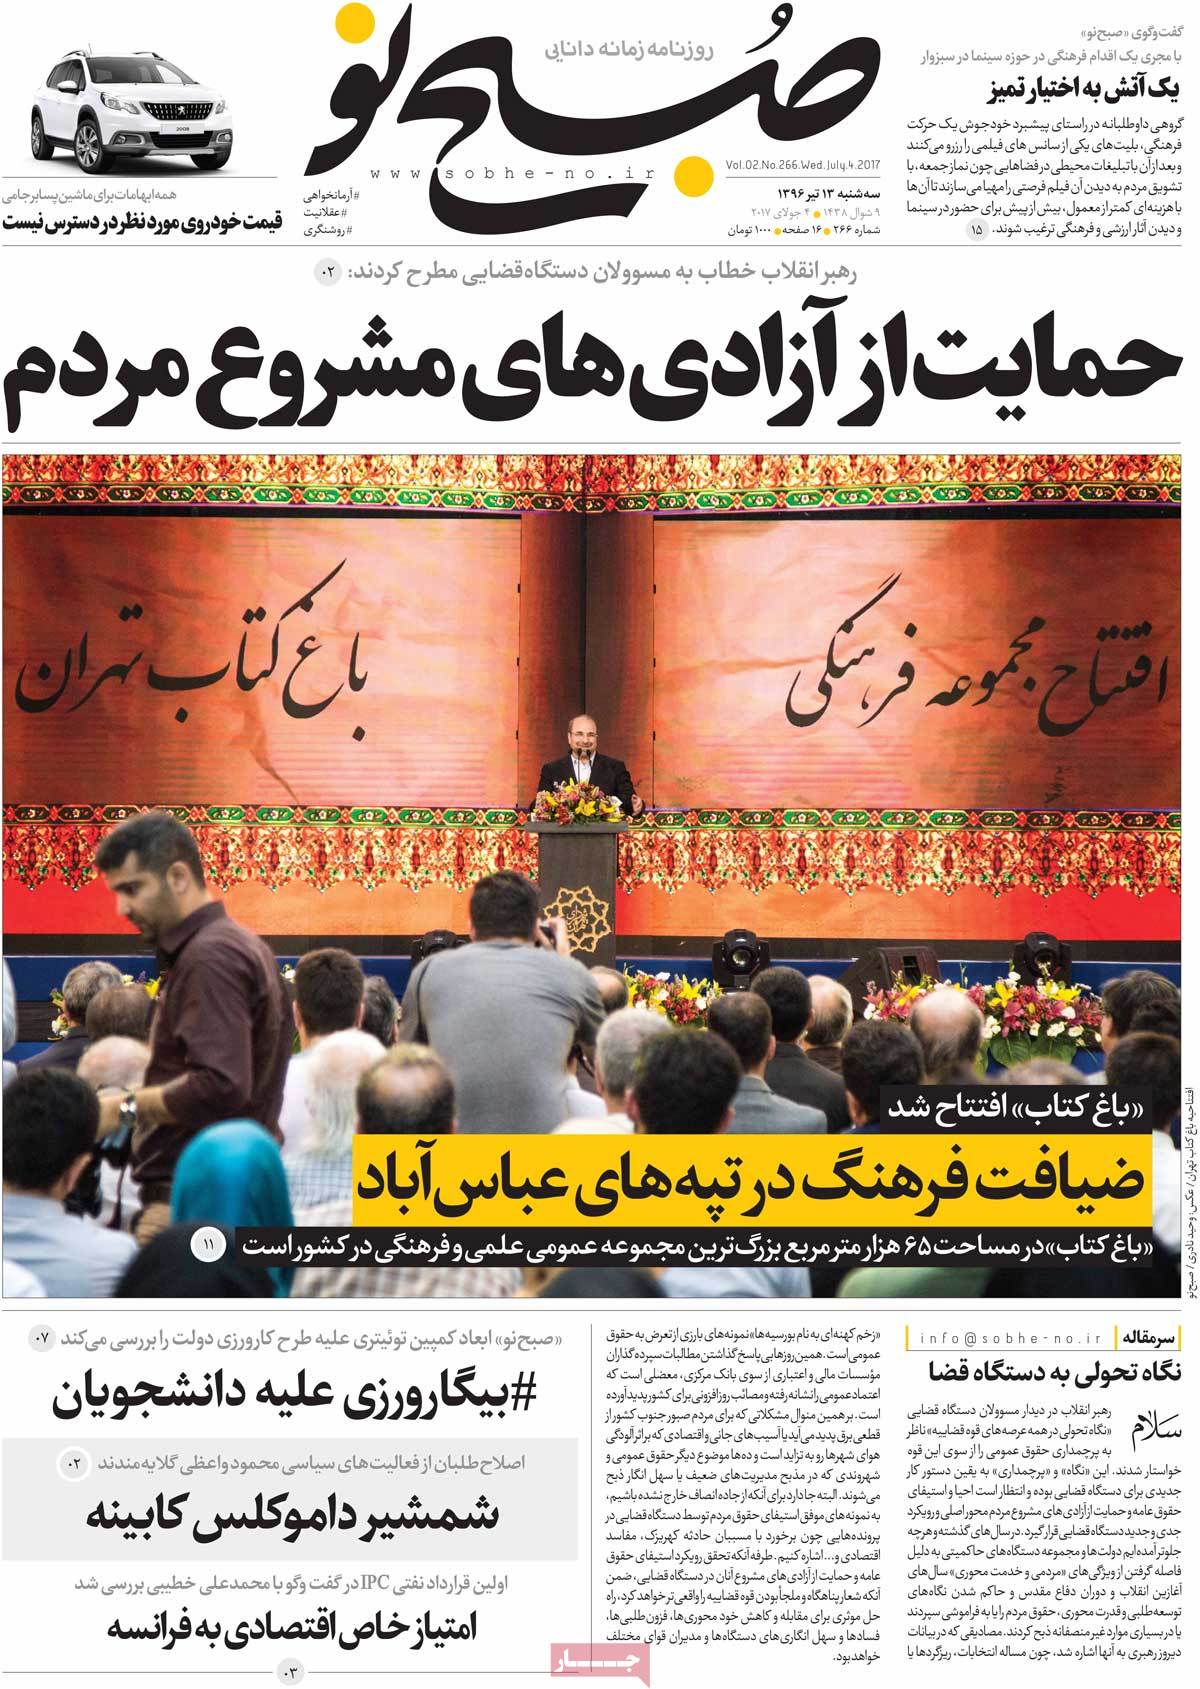 A Look at Iranian Newspaper Front Pages on July 4 - sobheno